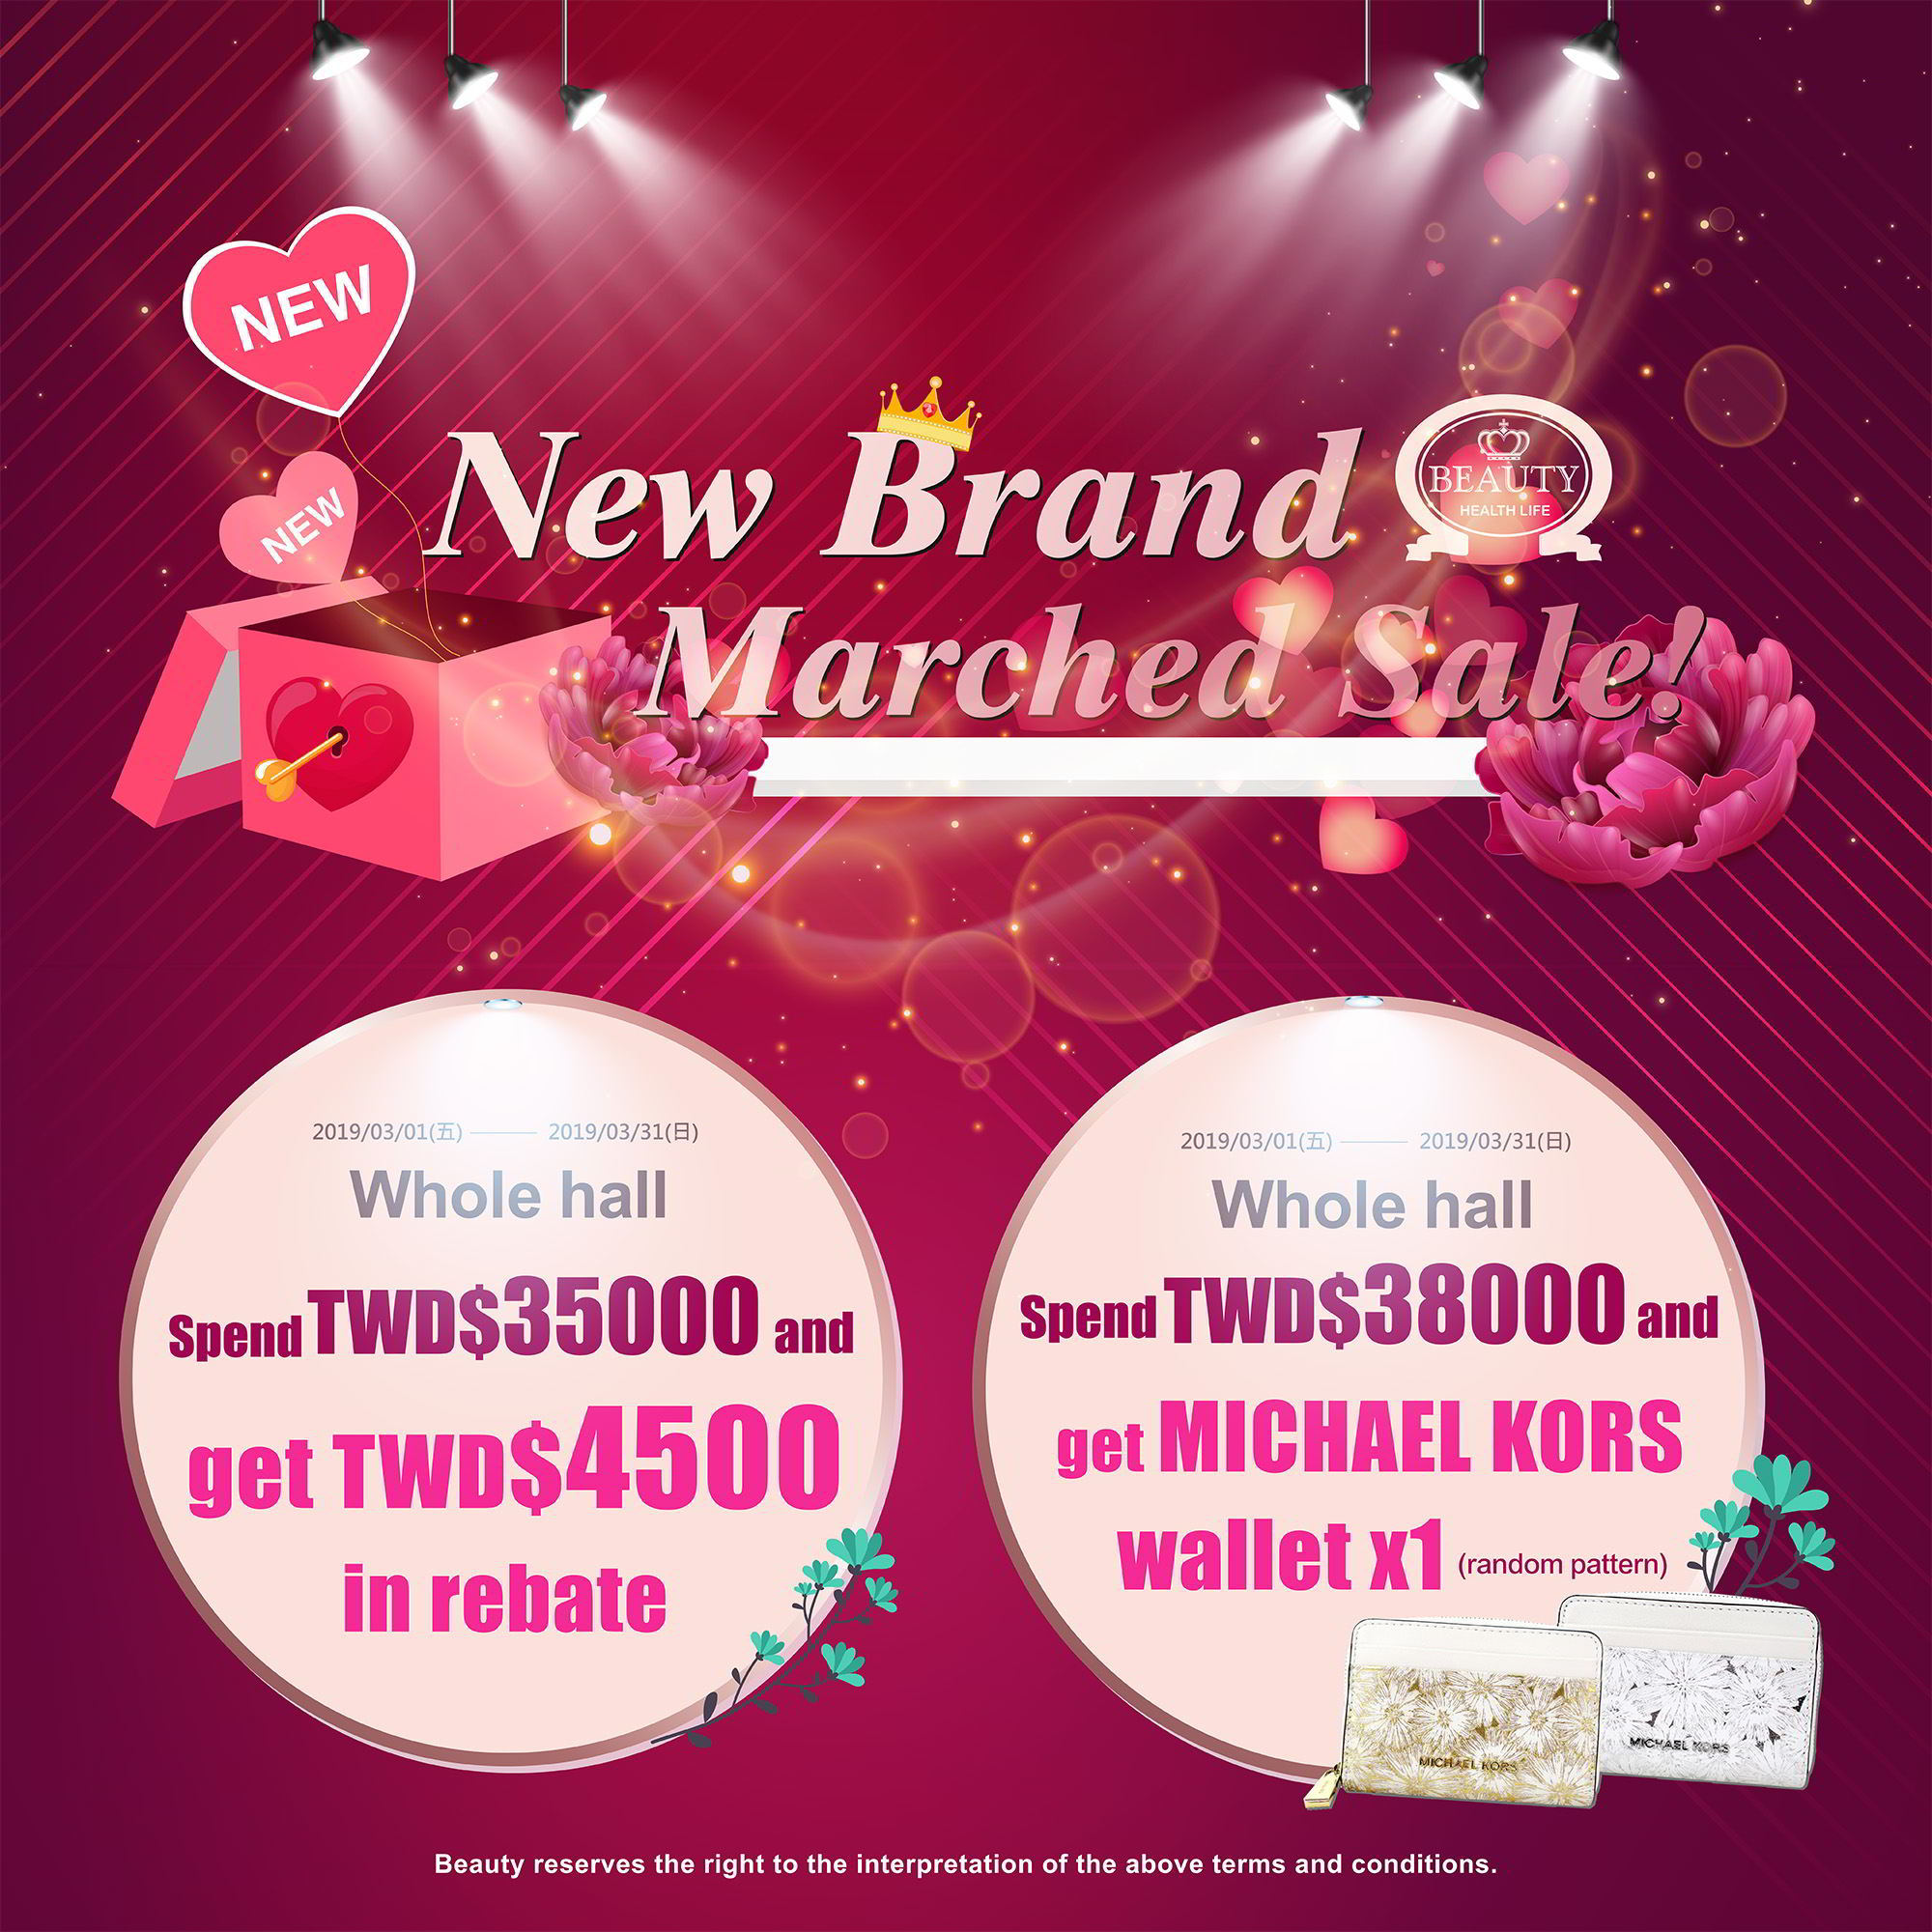 New Brand Marched Sale!EDM.jpg